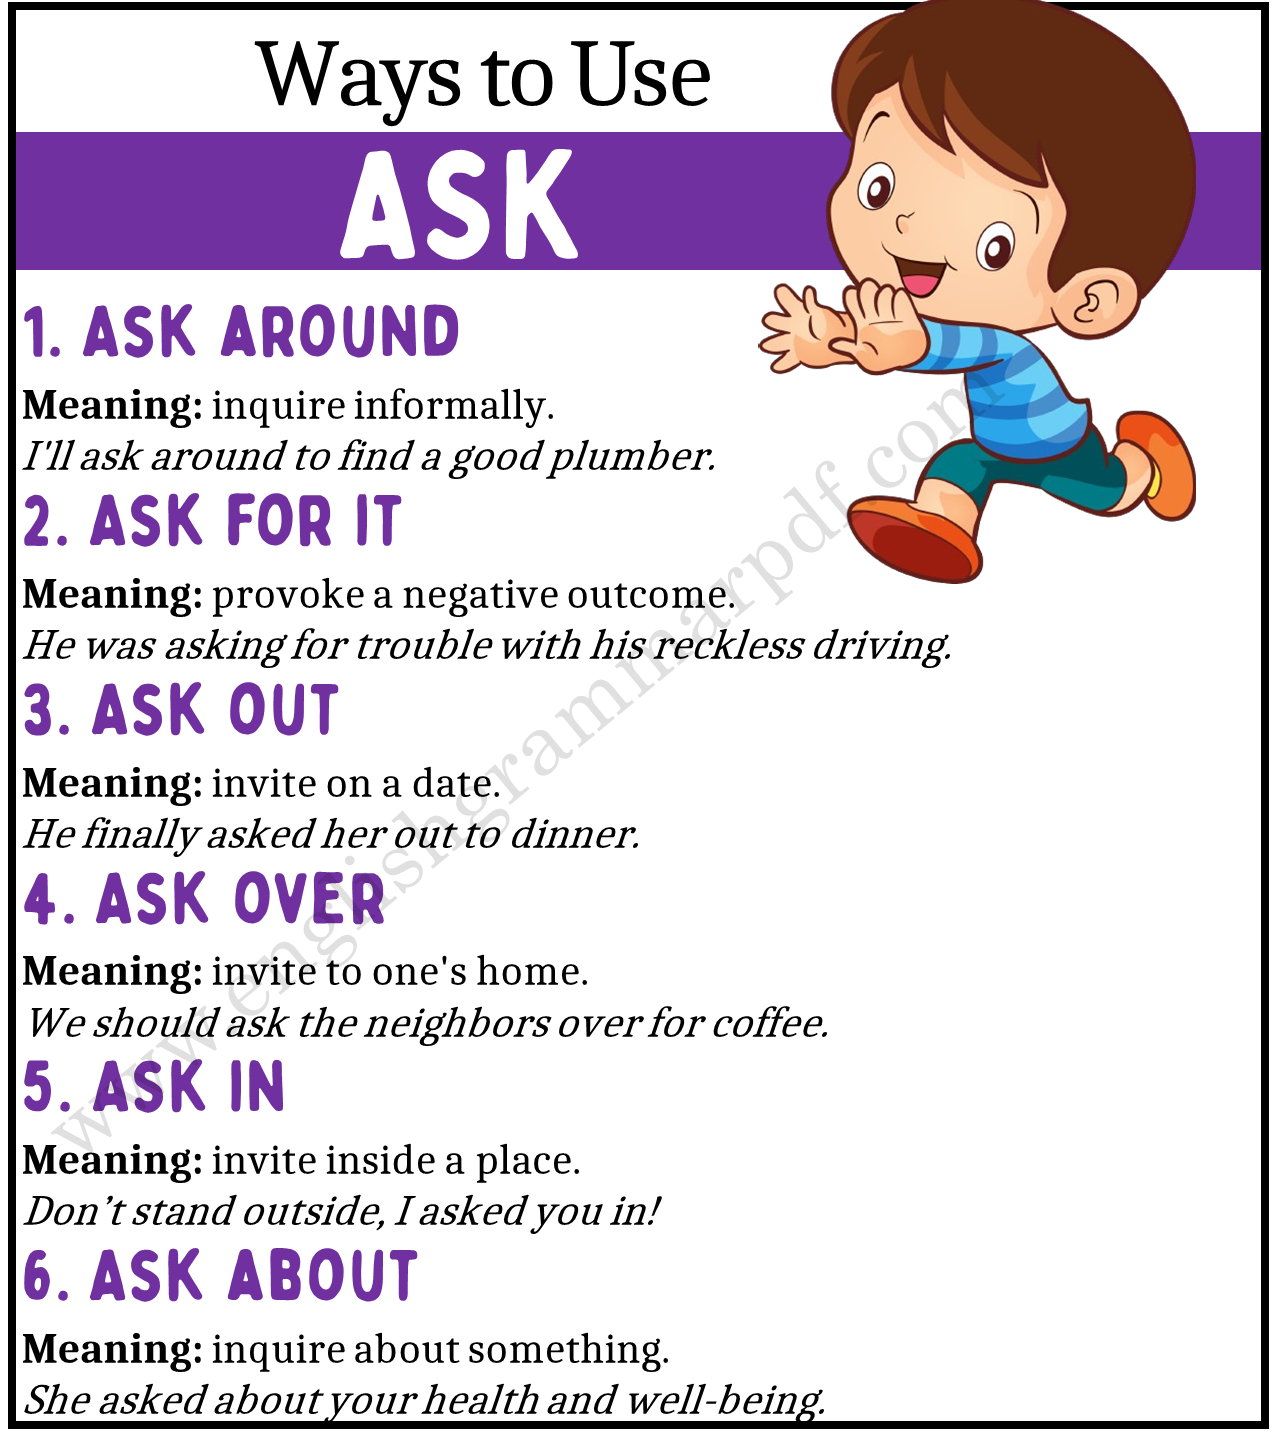 Ways to Use ASK